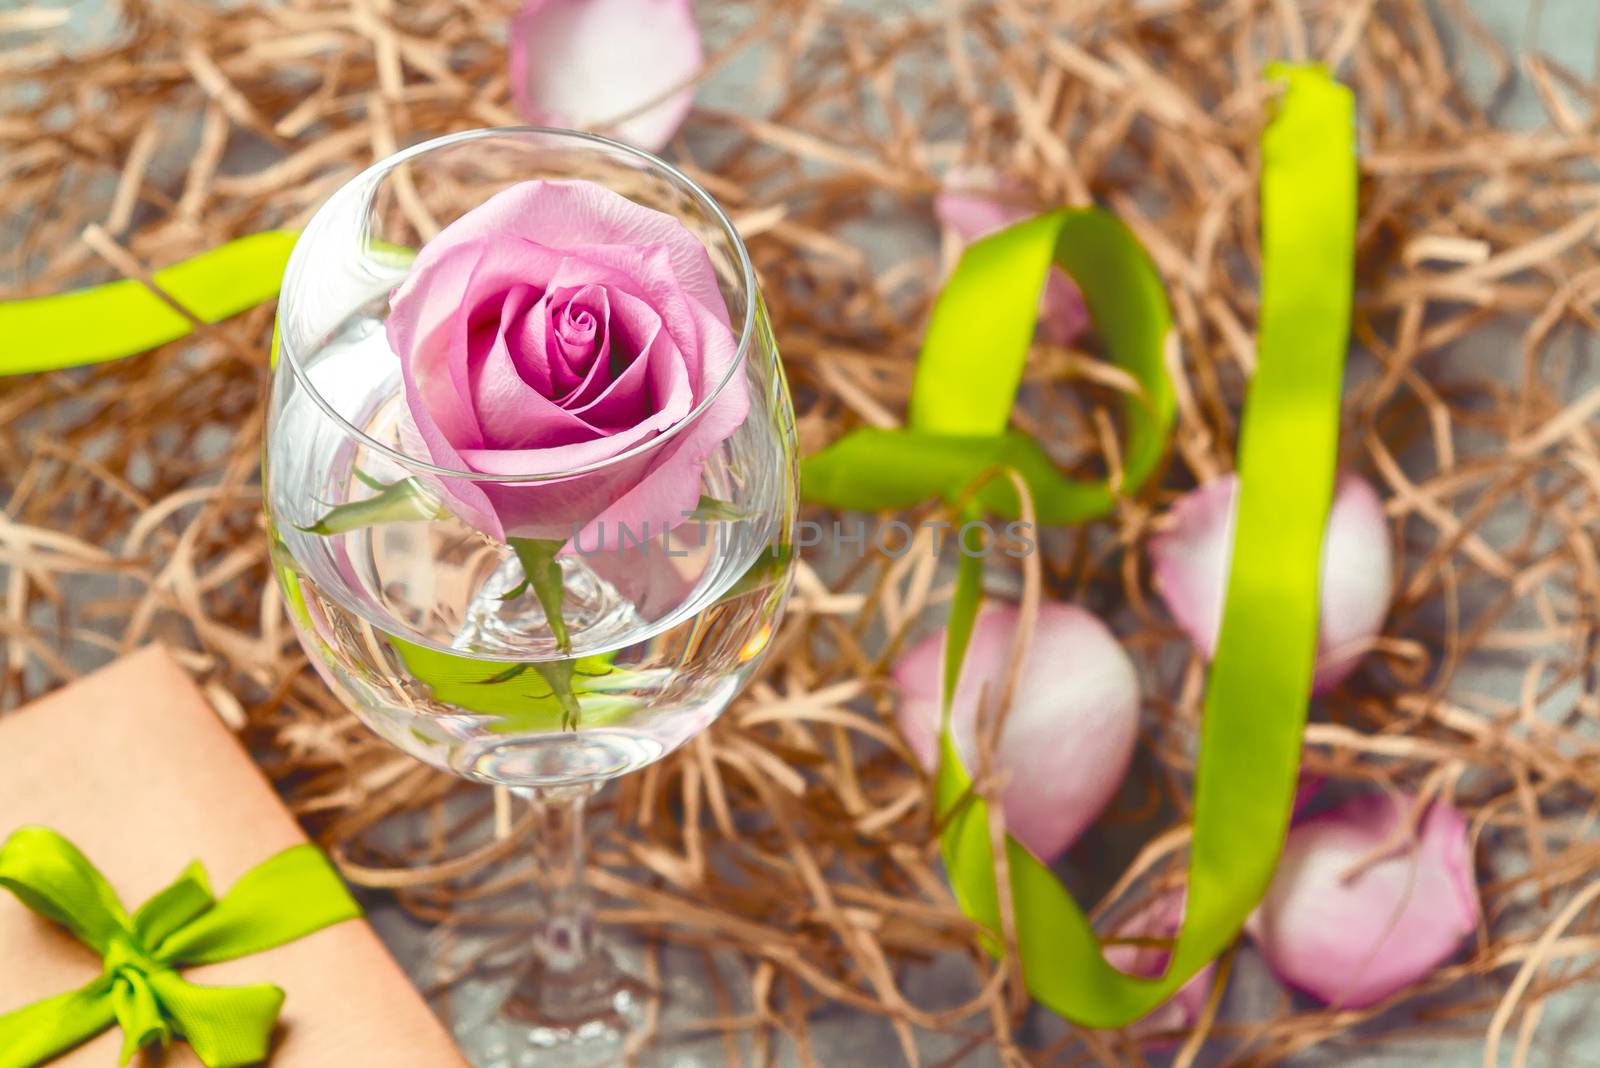 Pink rose in a glass with water and decorations on the table.